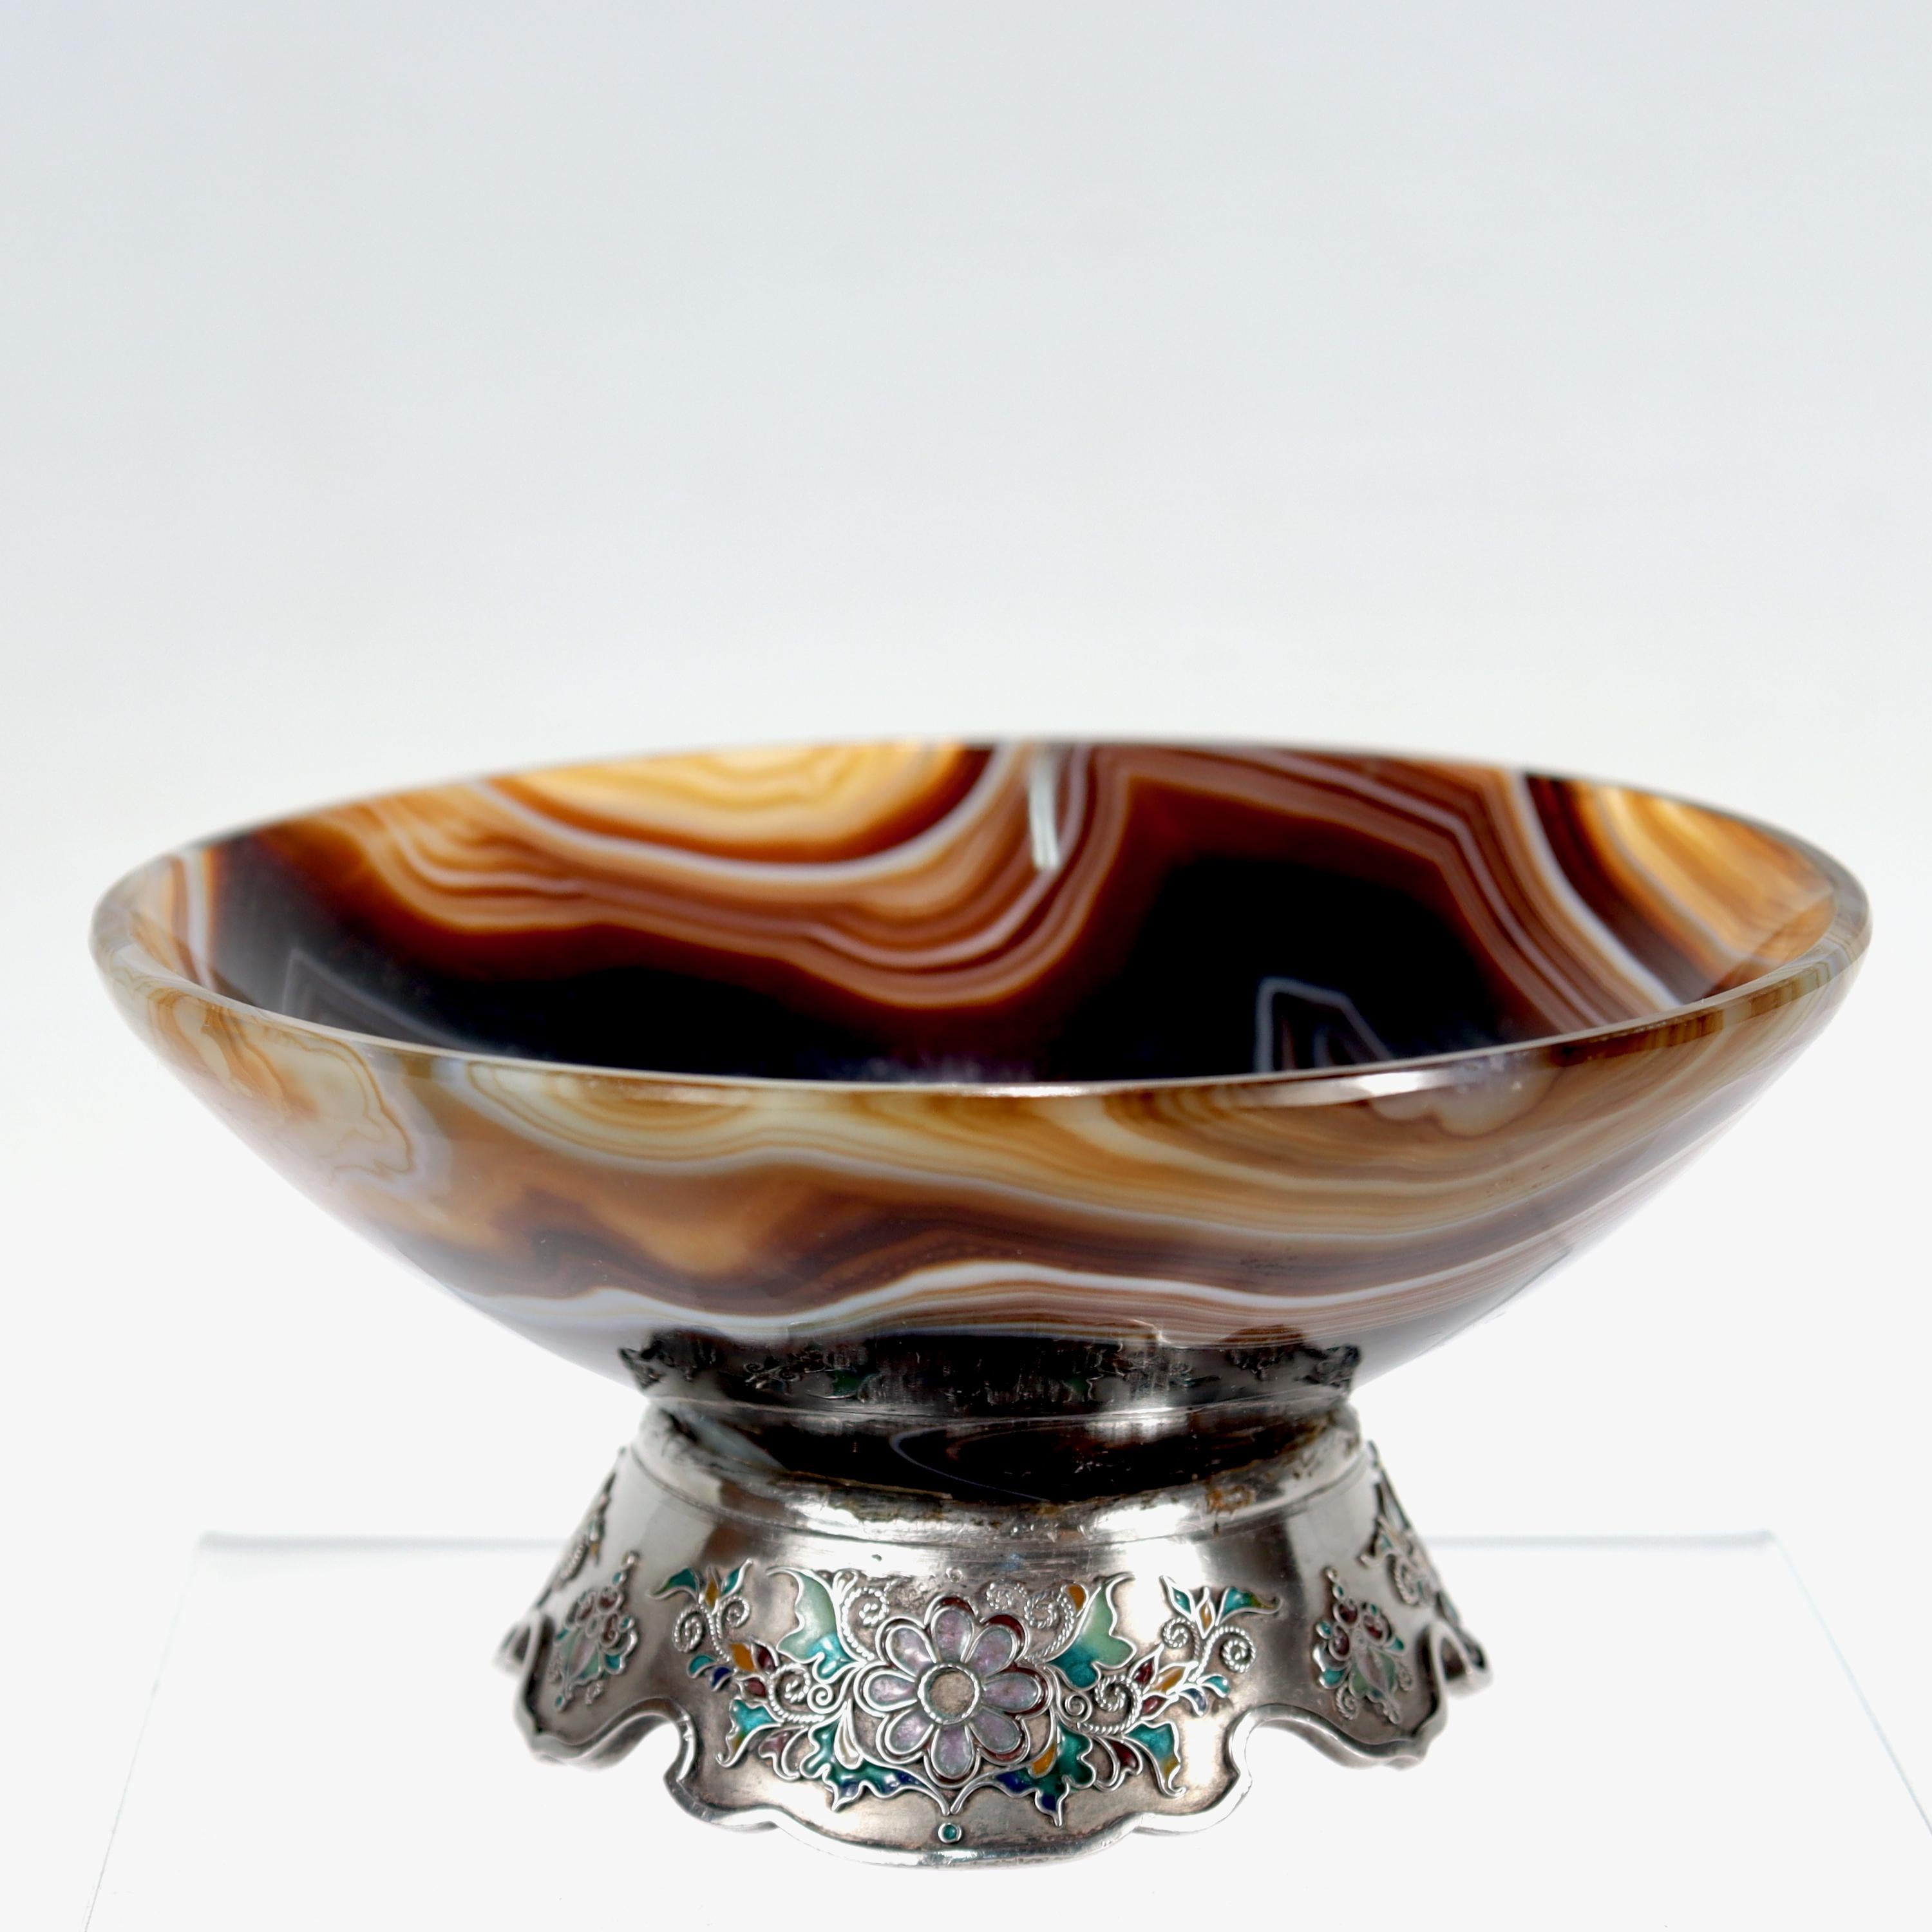 Old or Antique Enameled Austrian Silver & Agate Bowl In Good Condition For Sale In Philadelphia, PA